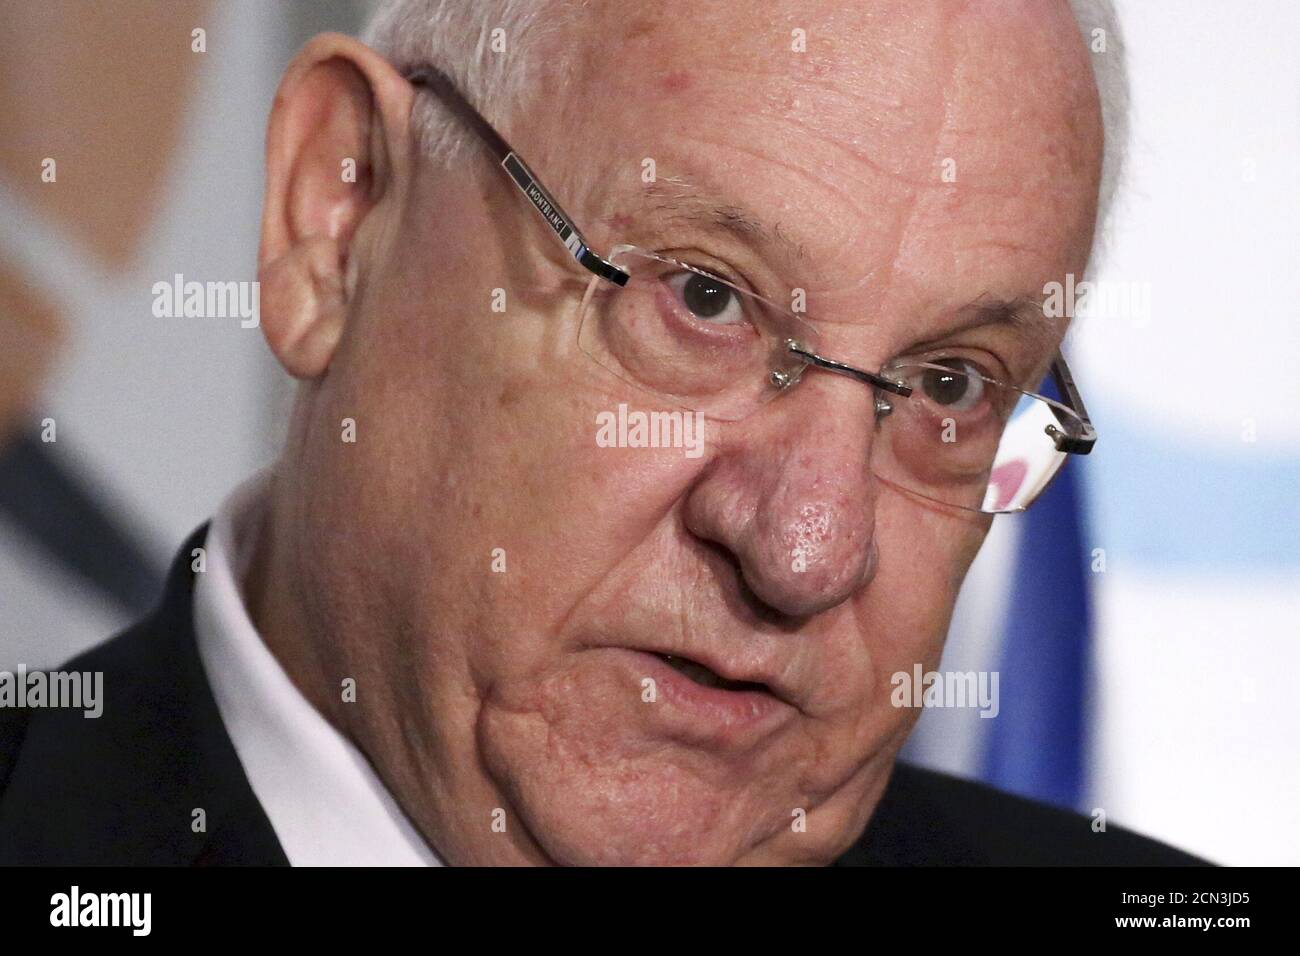 Israeli President Reuven Rivlin addresses attendees at the 'Haaretz Q: with New Israel Fund' event at The Roosevelt Hotel in the Manhattan borough of New York City, December 13, 2015. REUTERS/Andrew Kelly Stock Photo